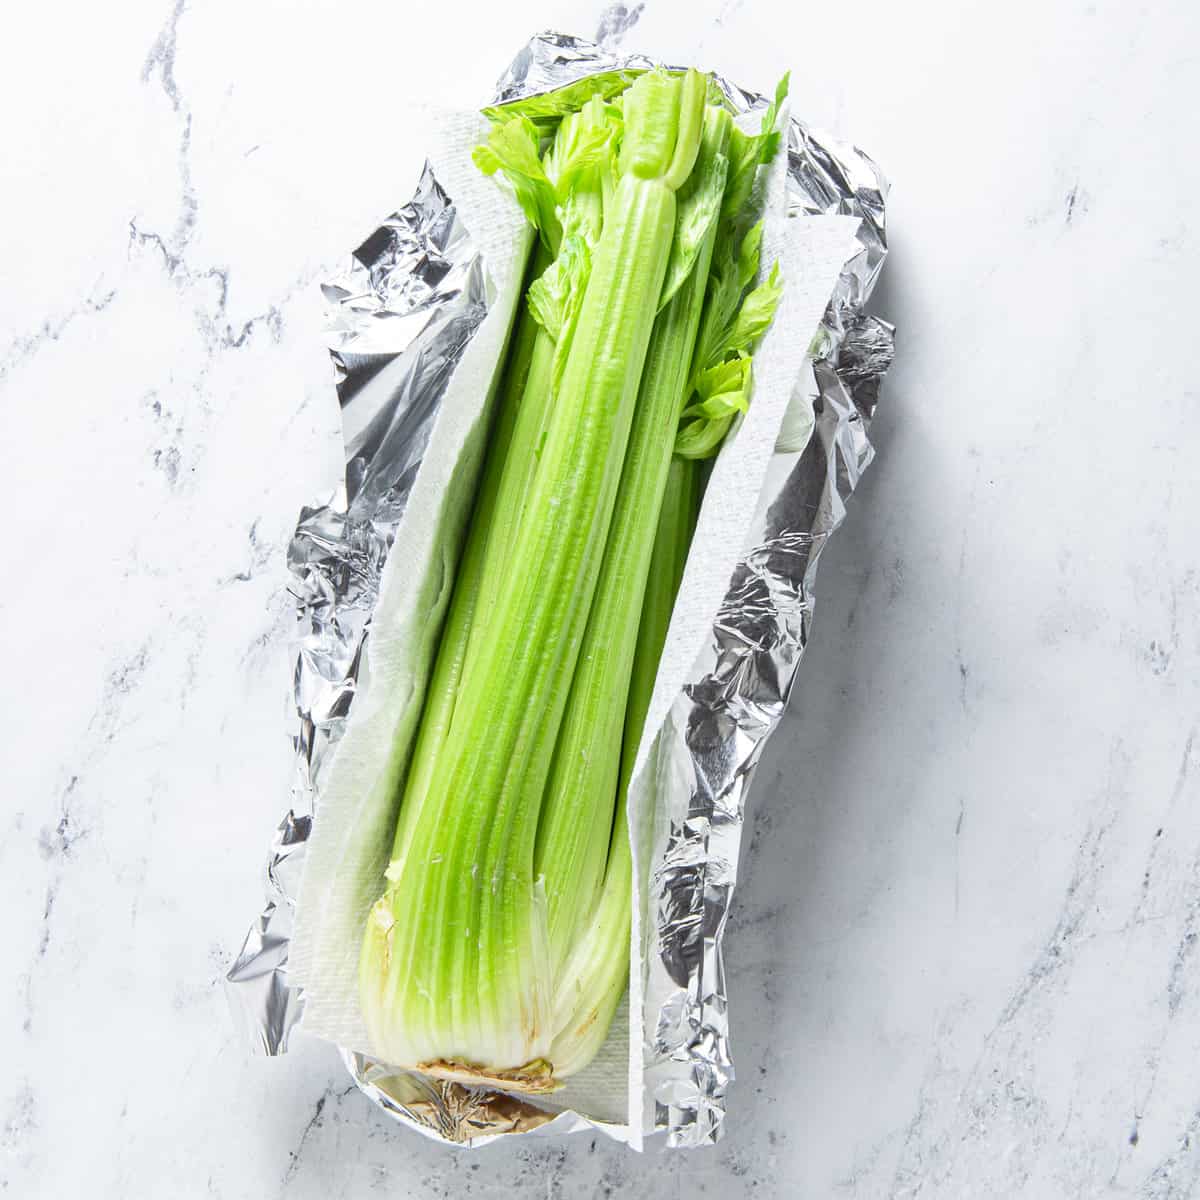 Celery wrapped in foil and a towel.